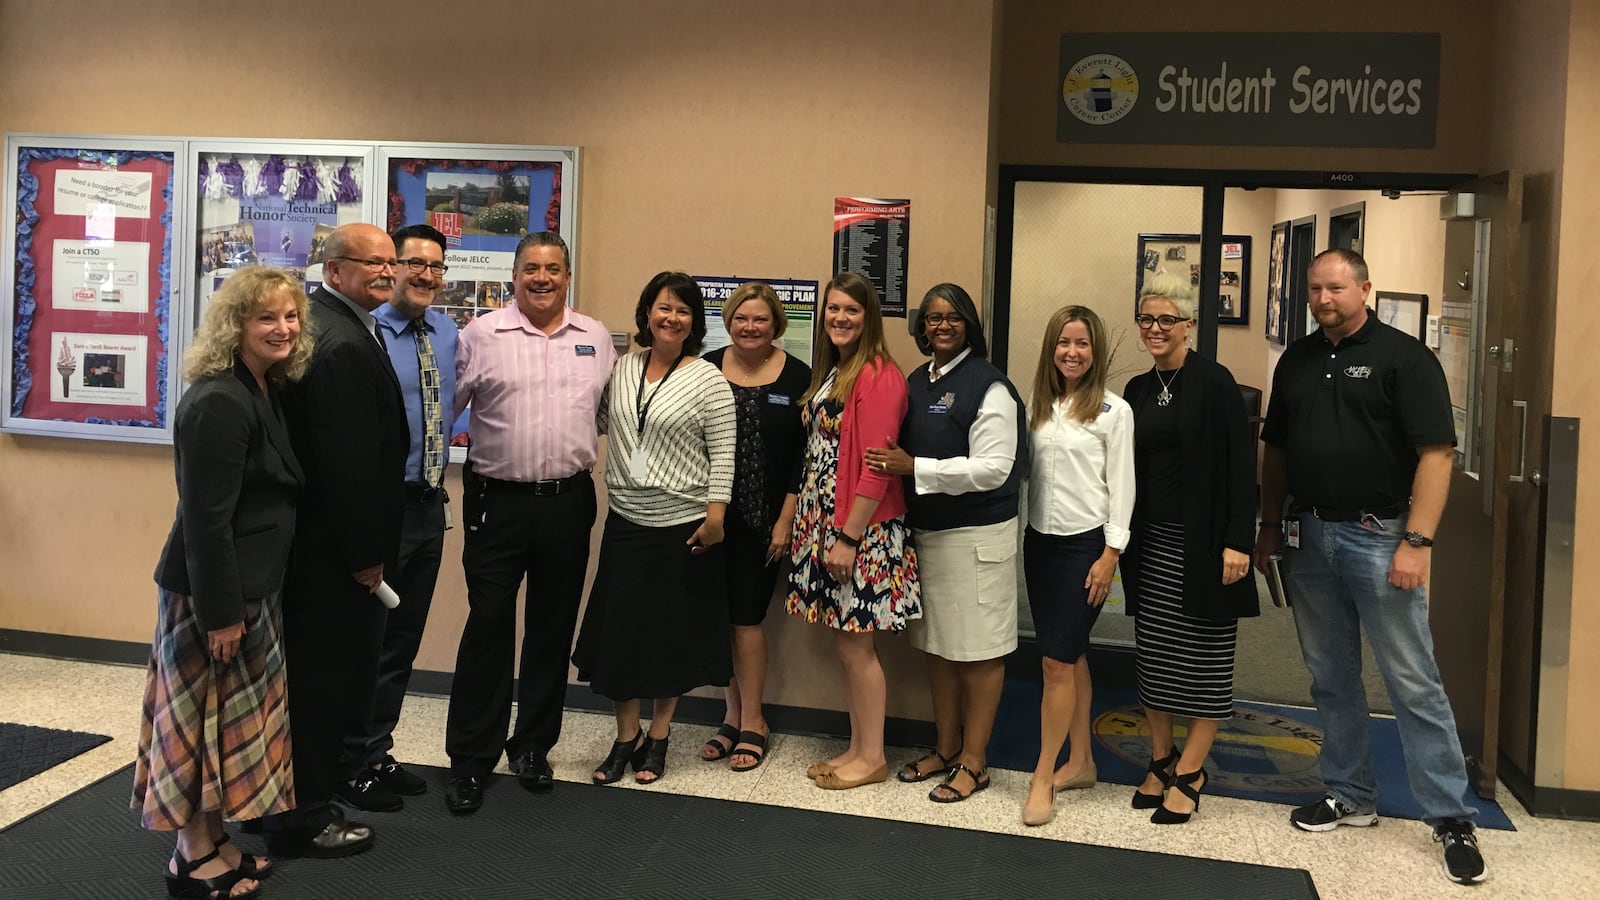 State superintendent Glenda Ritz and Democratic candidate for governor John Gregg pose with staff from Washington Township's J. Everett Light Career Center. After the tour, Chalkbeat asked the candidates about the state's role in reducing school segregation.